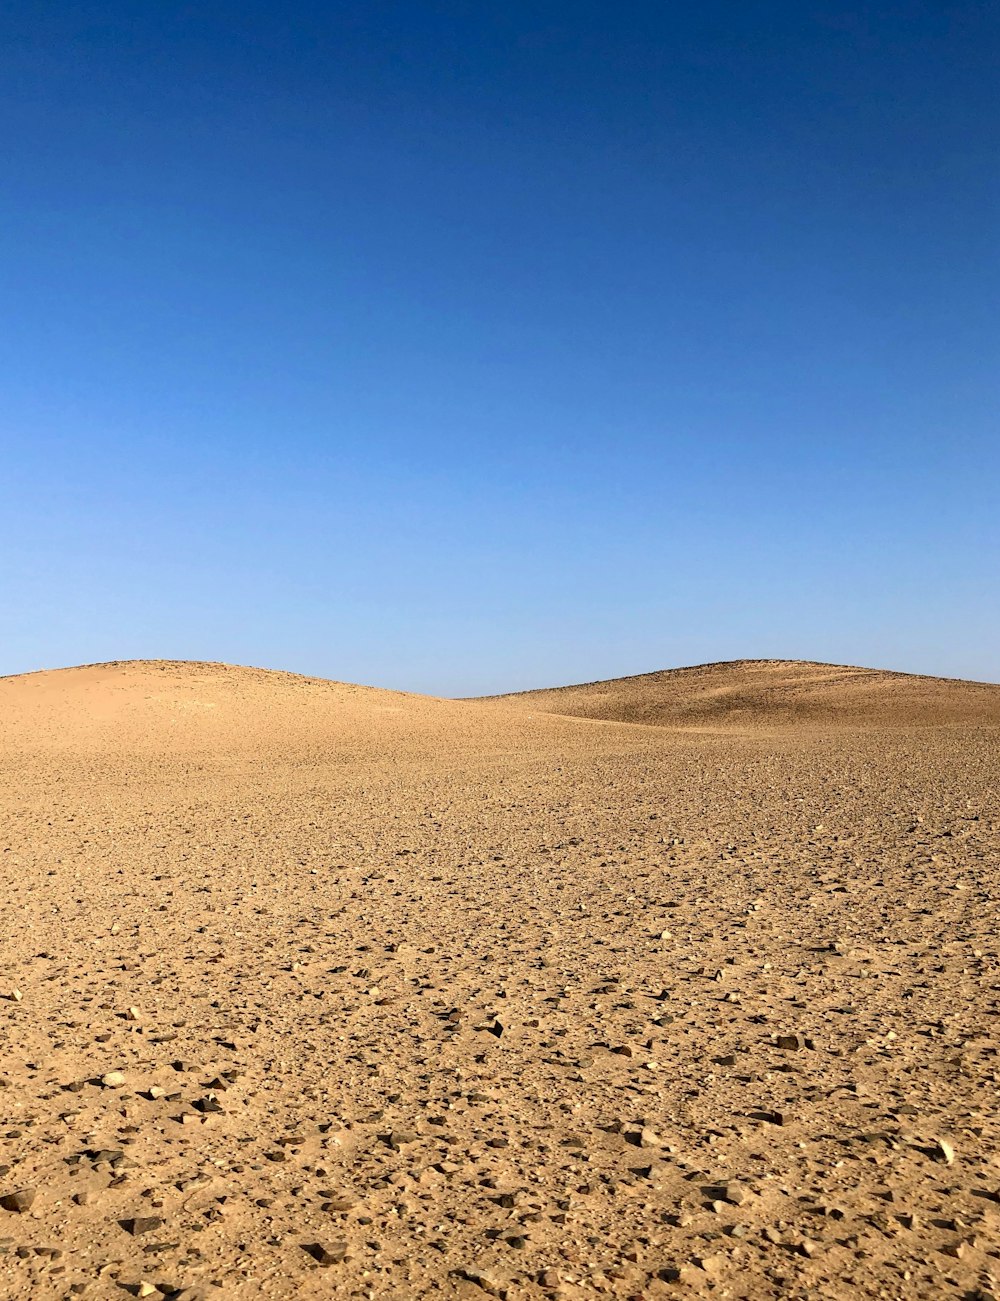 a lone horse standing in the middle of a desert